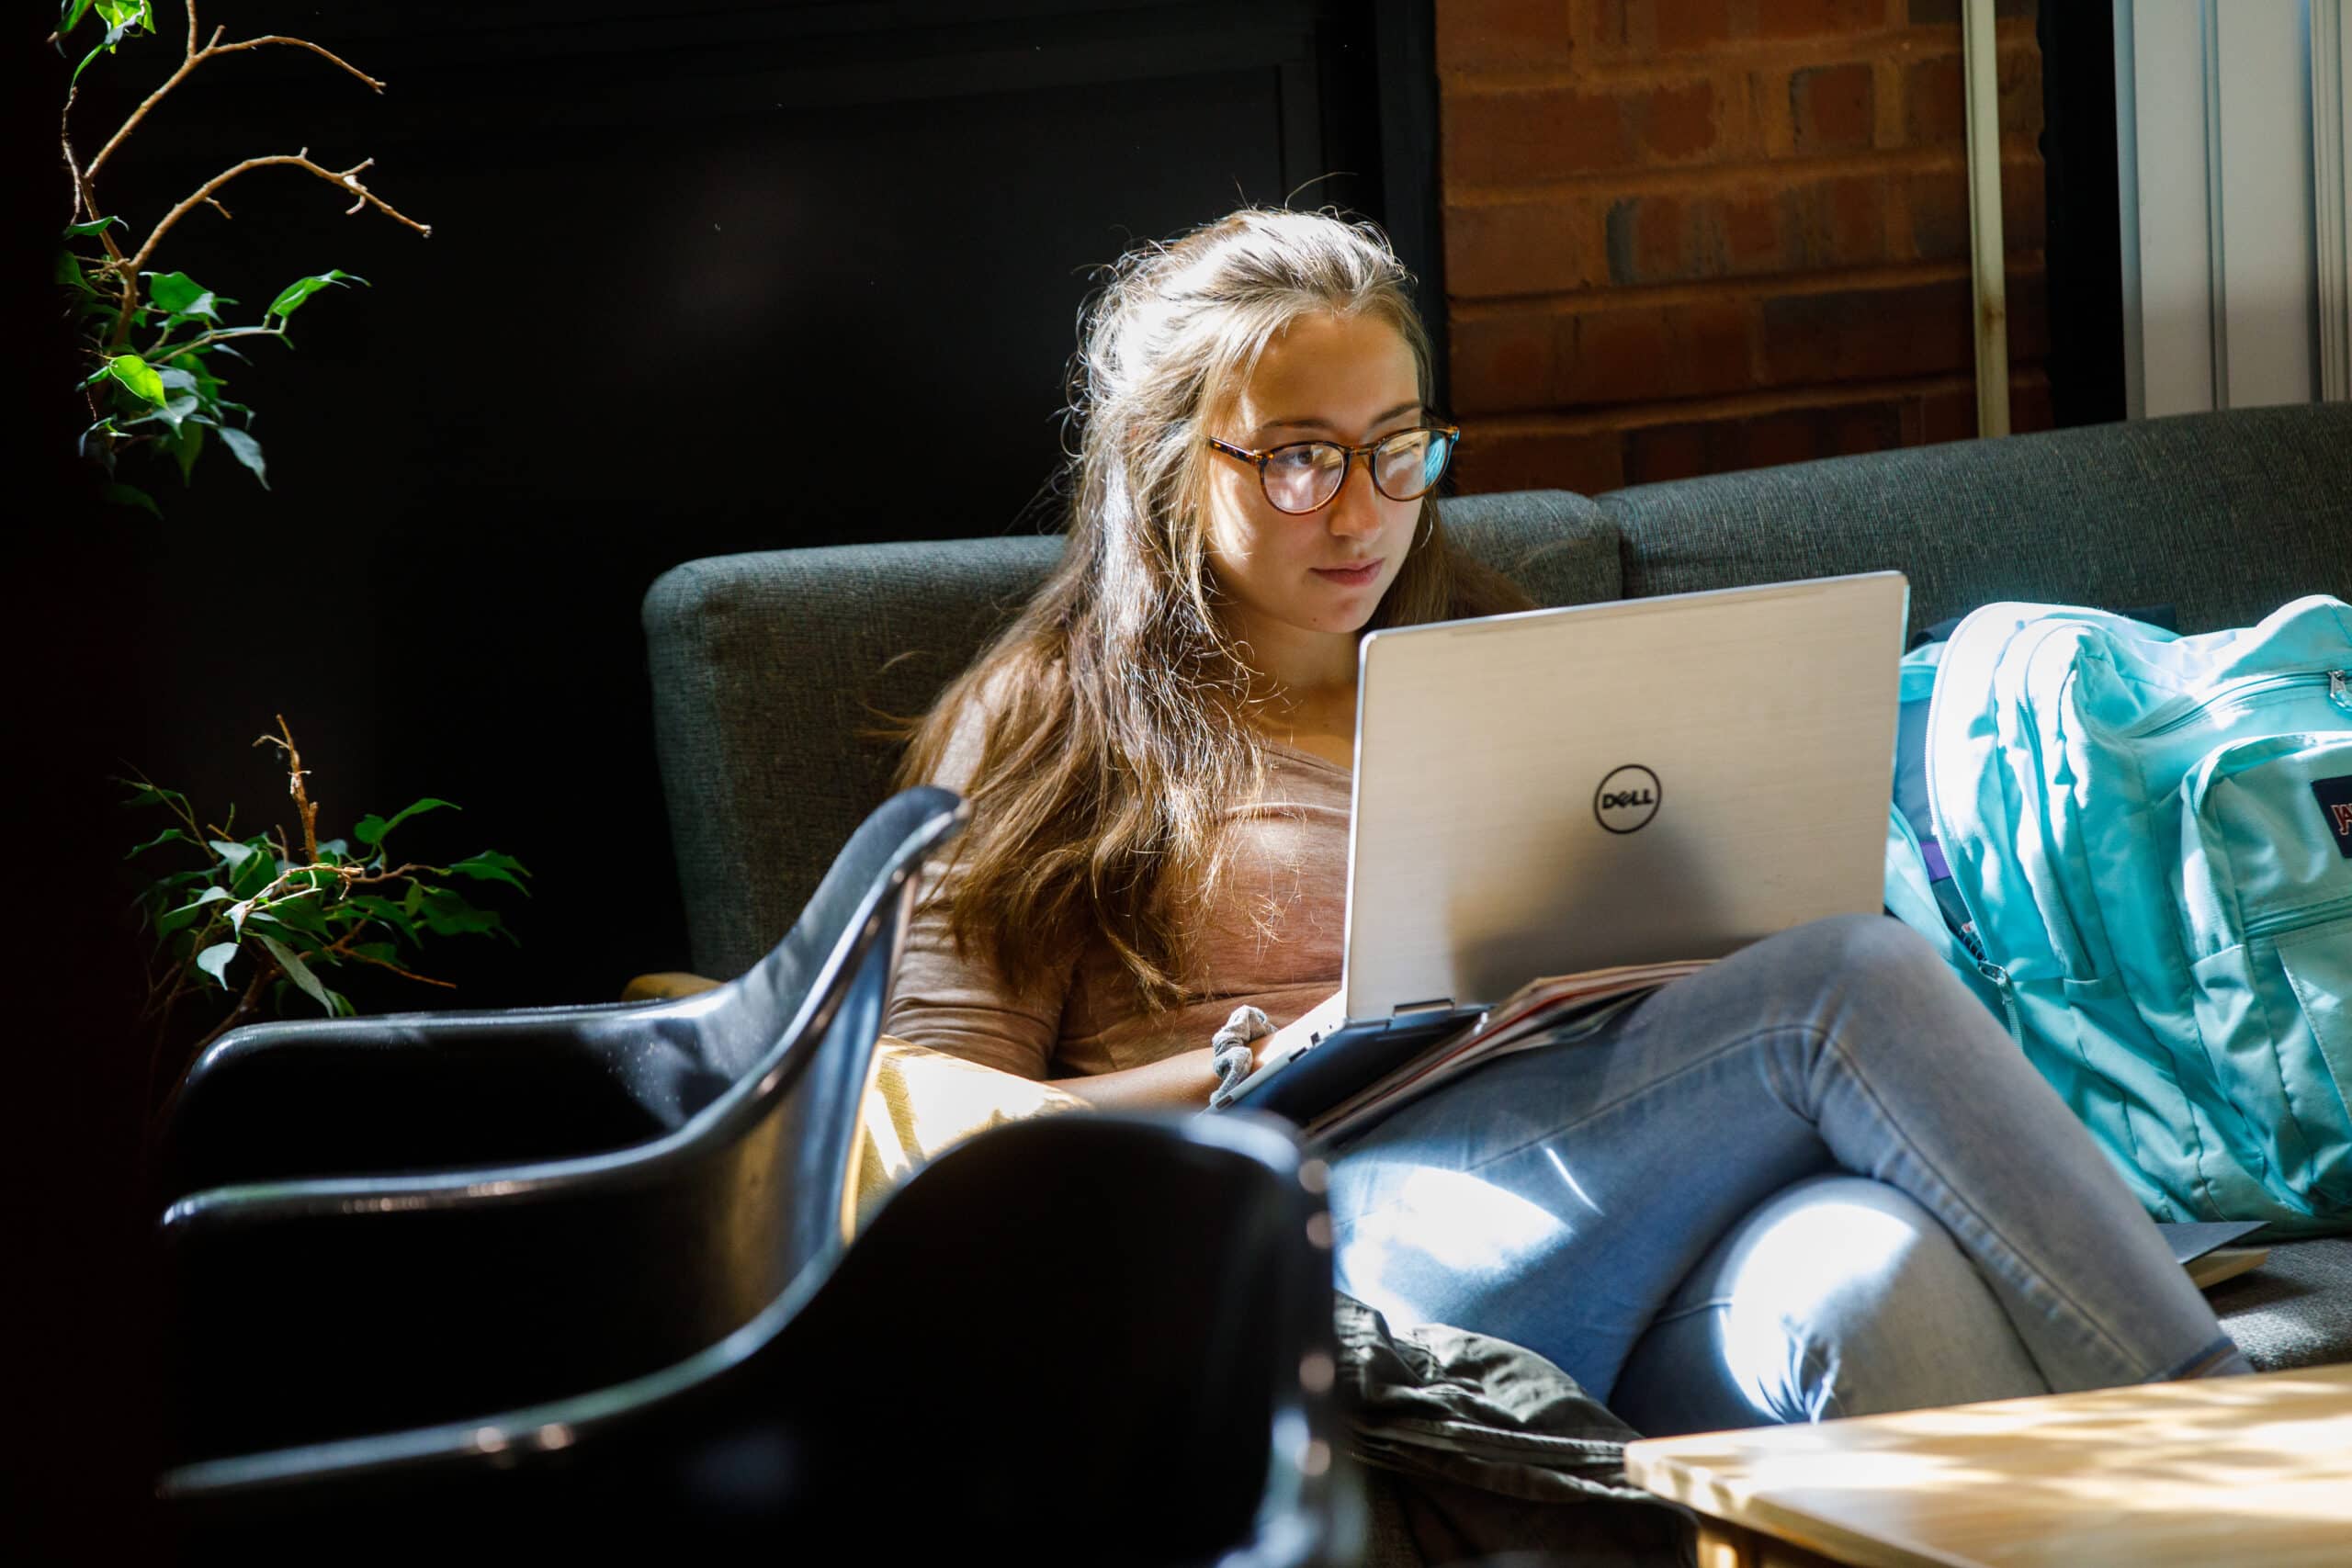 A girl with glasses sits on a couch with her laptop on her lap.